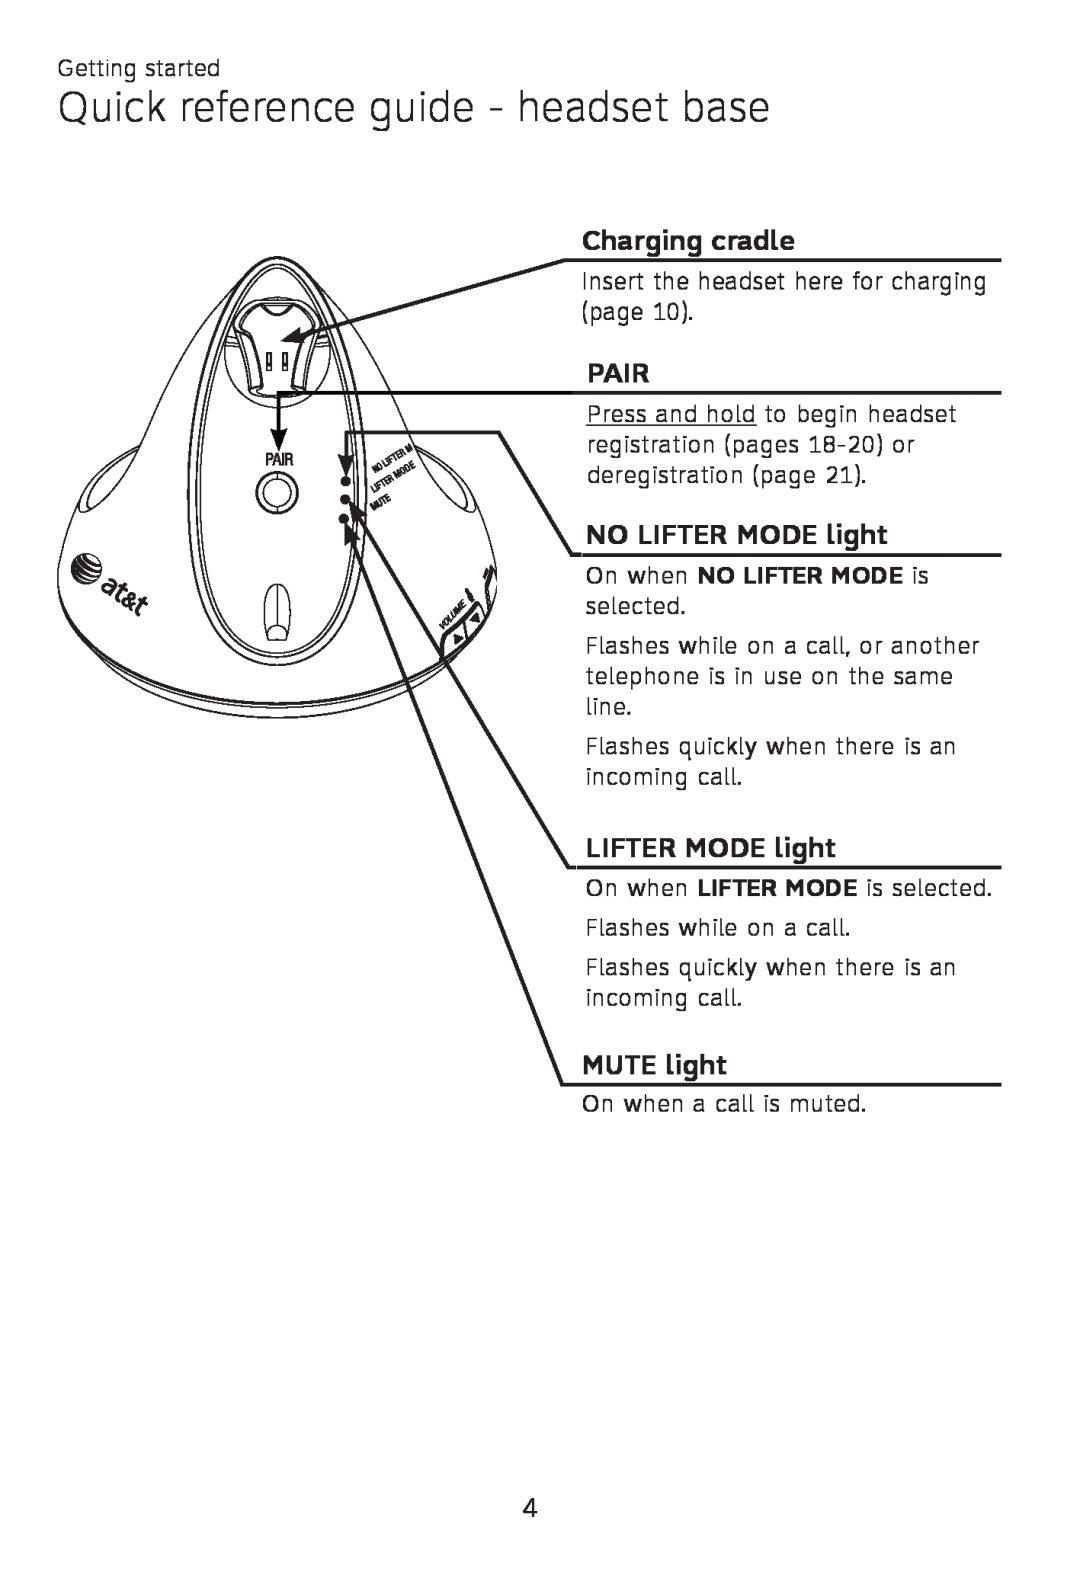 AT&T TL 7610 user manual Quick reference guide - headset base, Charging cradle, Pair, NO LIFTER MODE light, MUTE light 